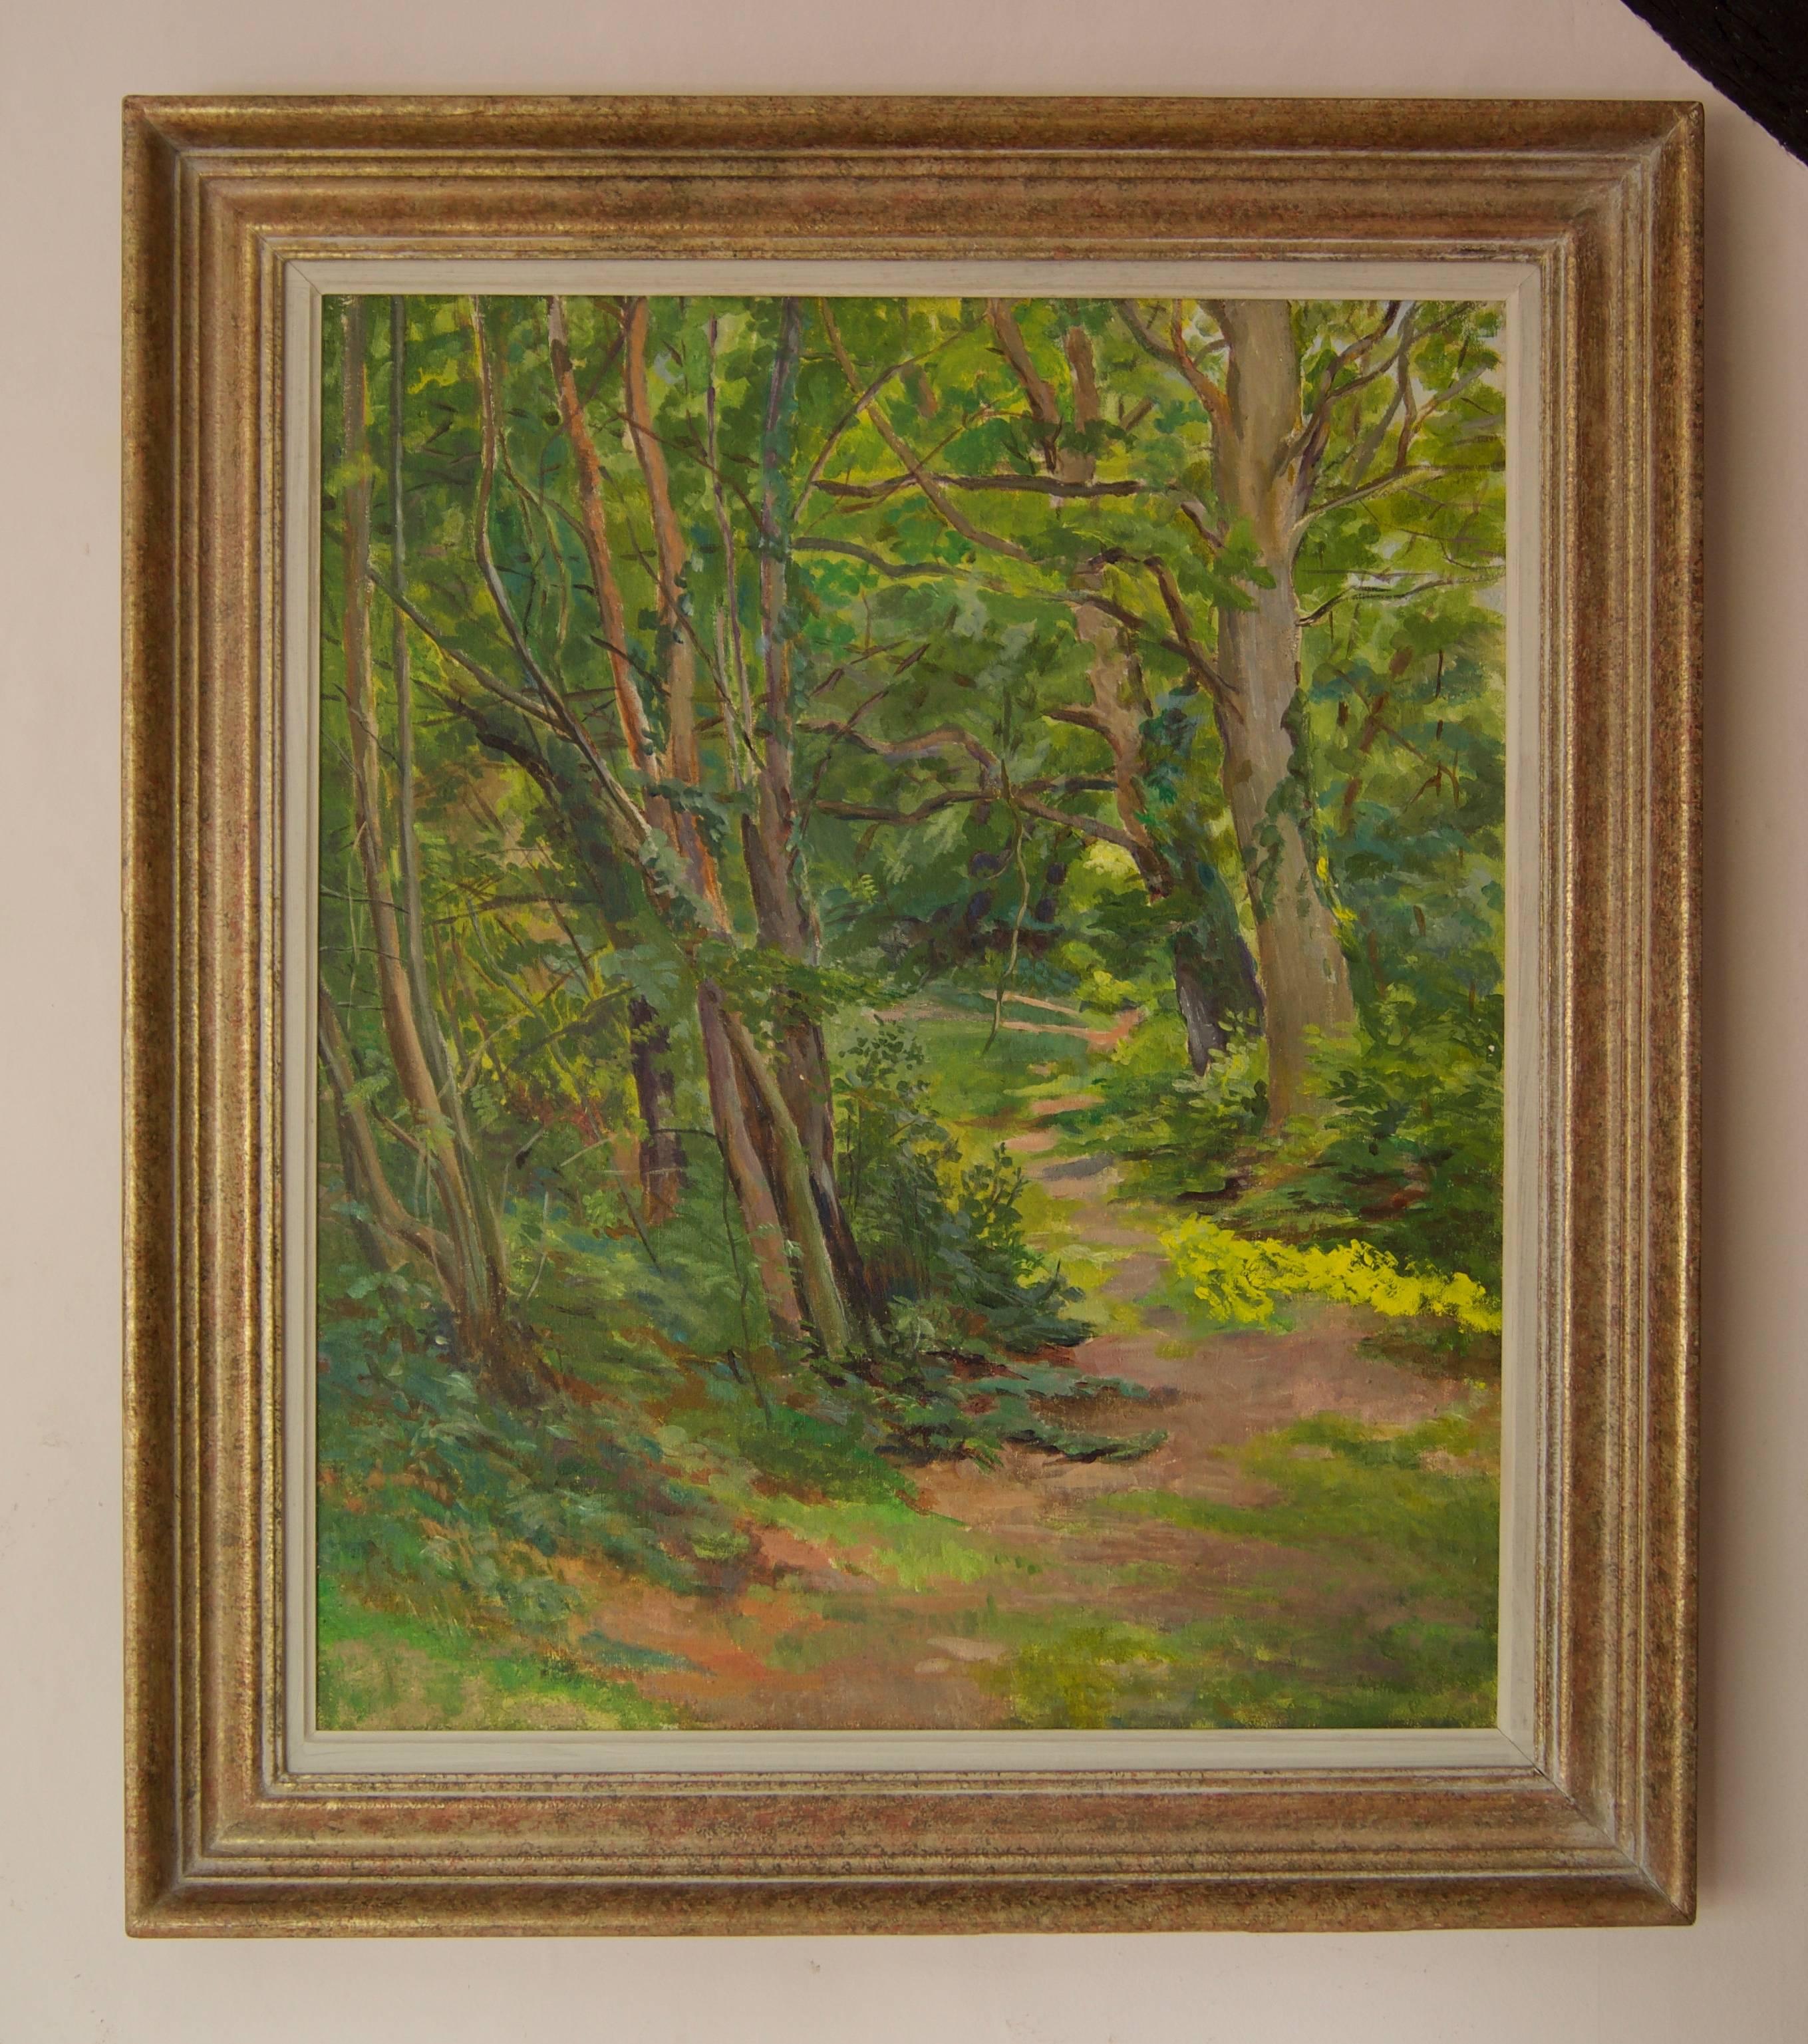 Spring Wooden Landscape - Mid 20th Century Impressionist Oil by Dorothy King For Sale 1